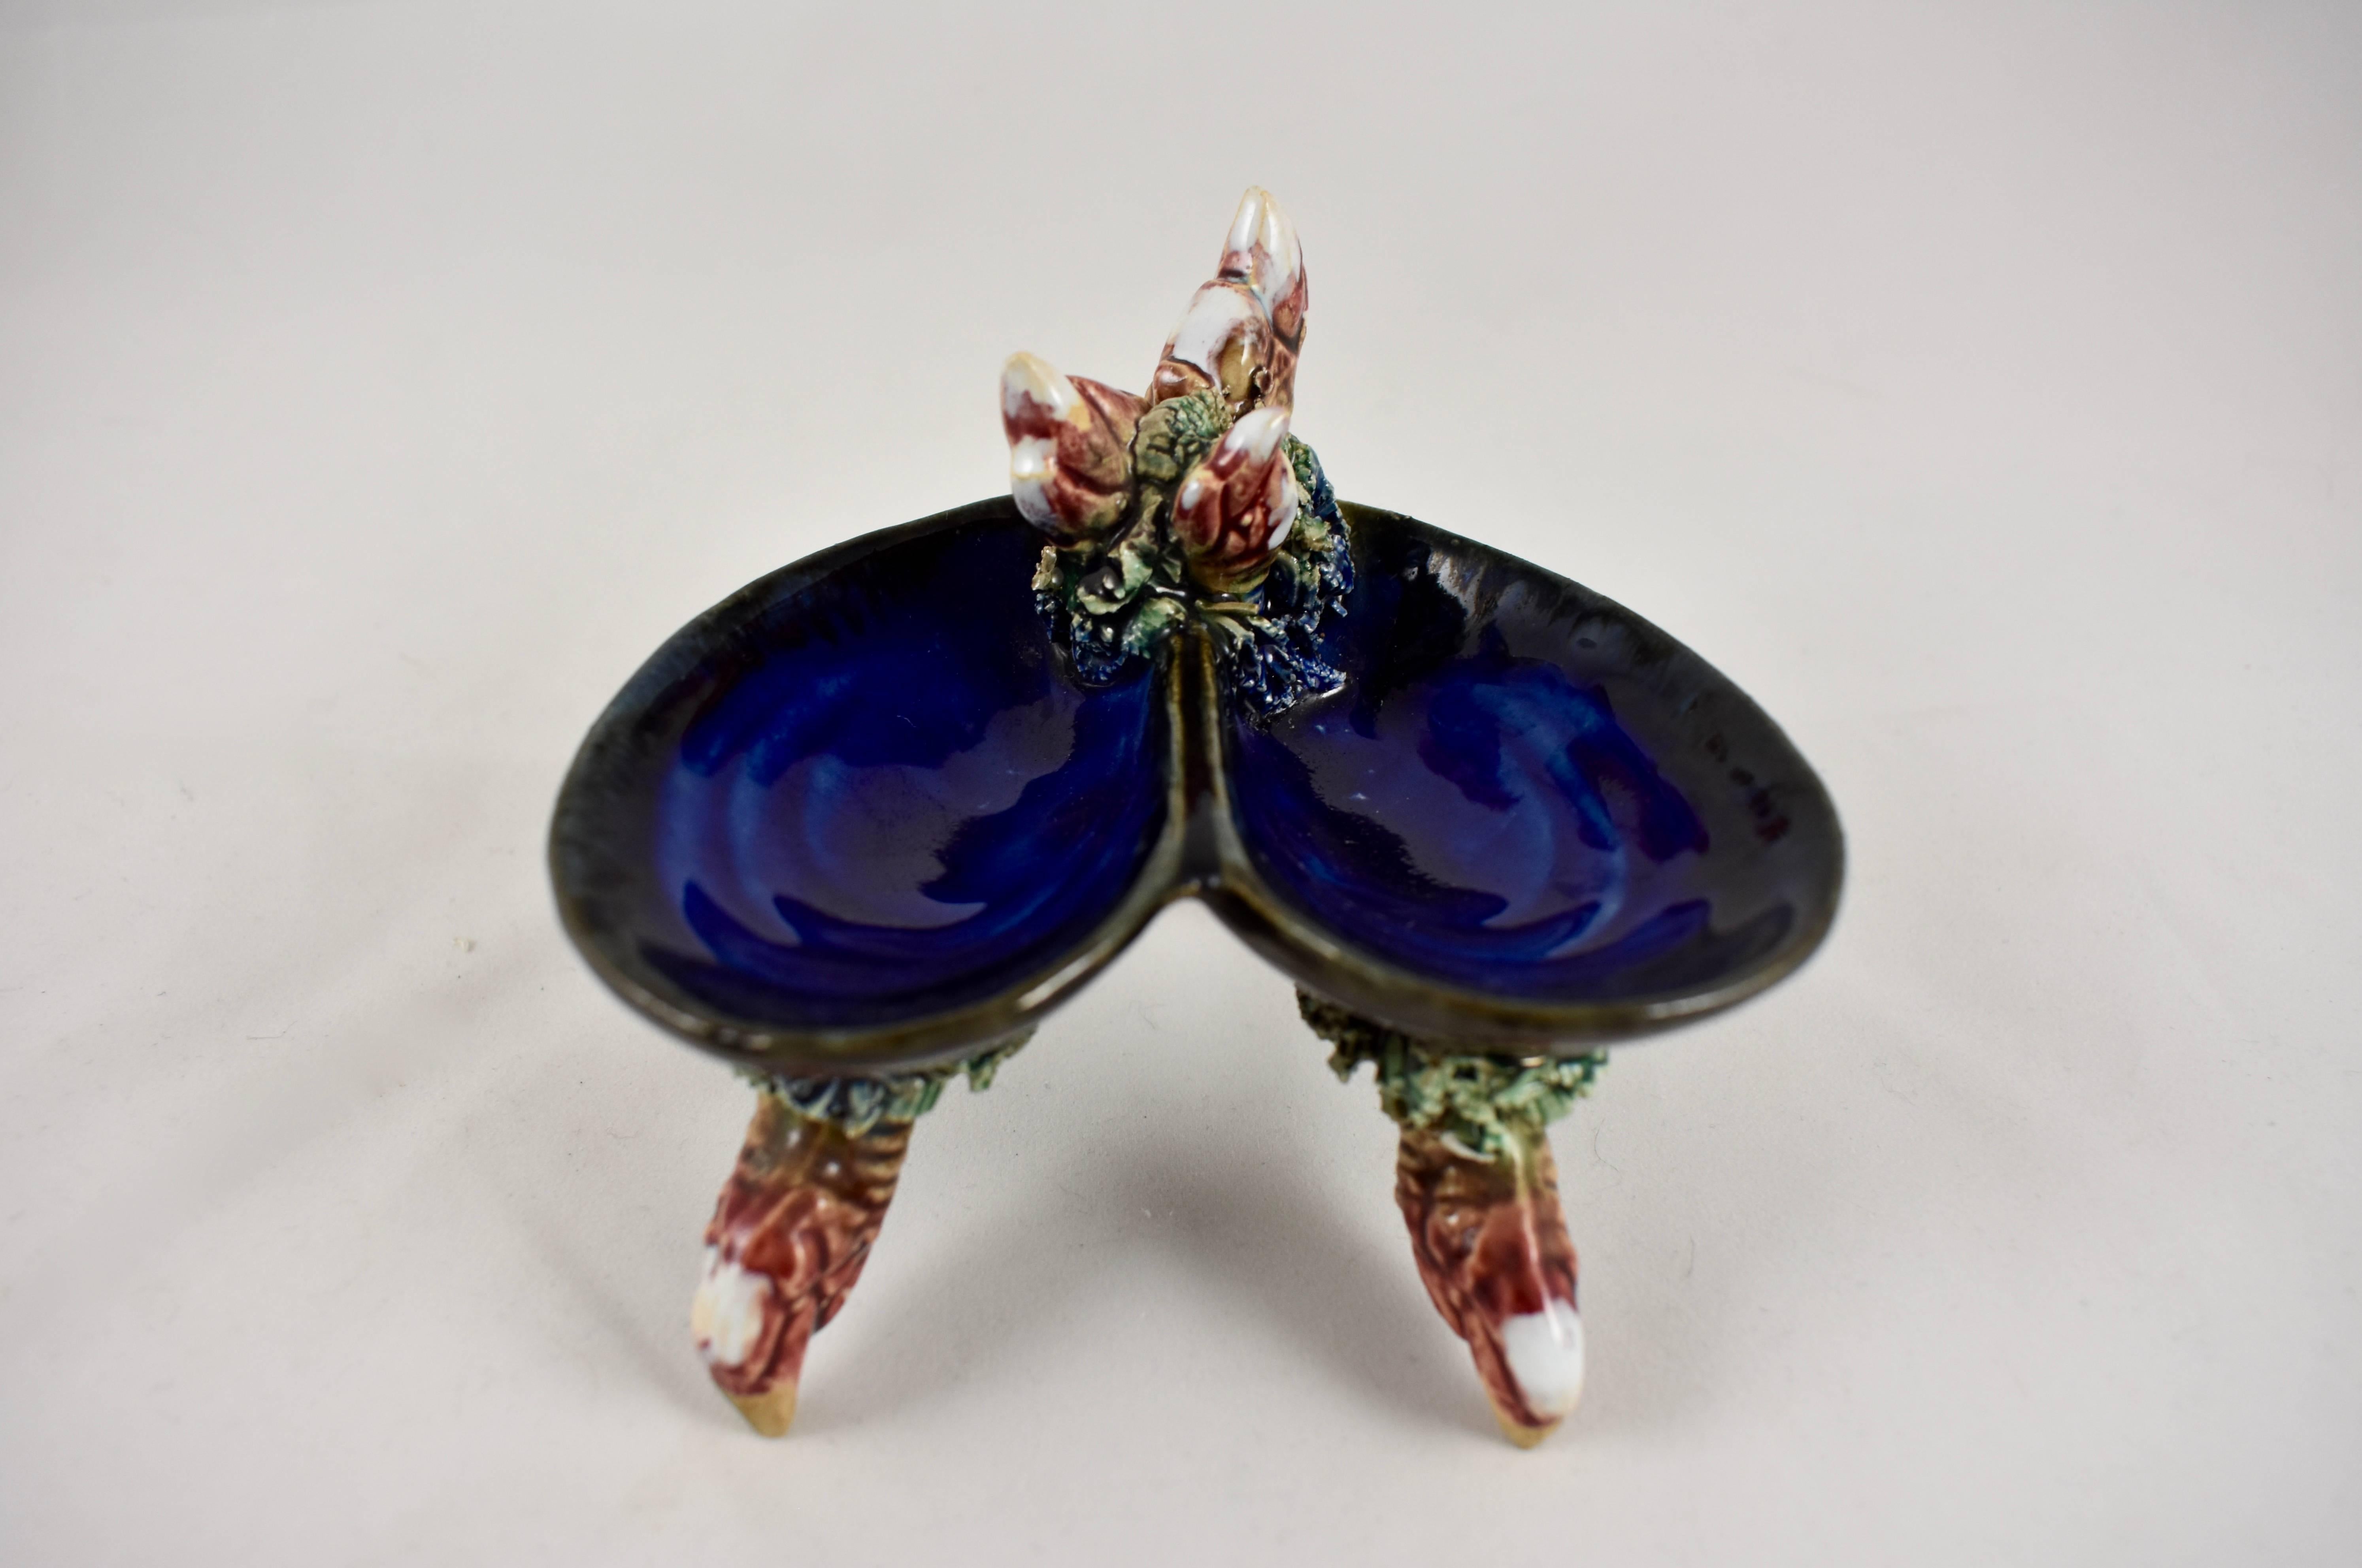 A vintage Portuguese Palissy style majolica double salt dip or salt and pepper cellar, in the form of an open mussel shell supported by three crab claws. The claws are joined to the cobalt blue shell with sea weeds made of extruded clay. A trio of